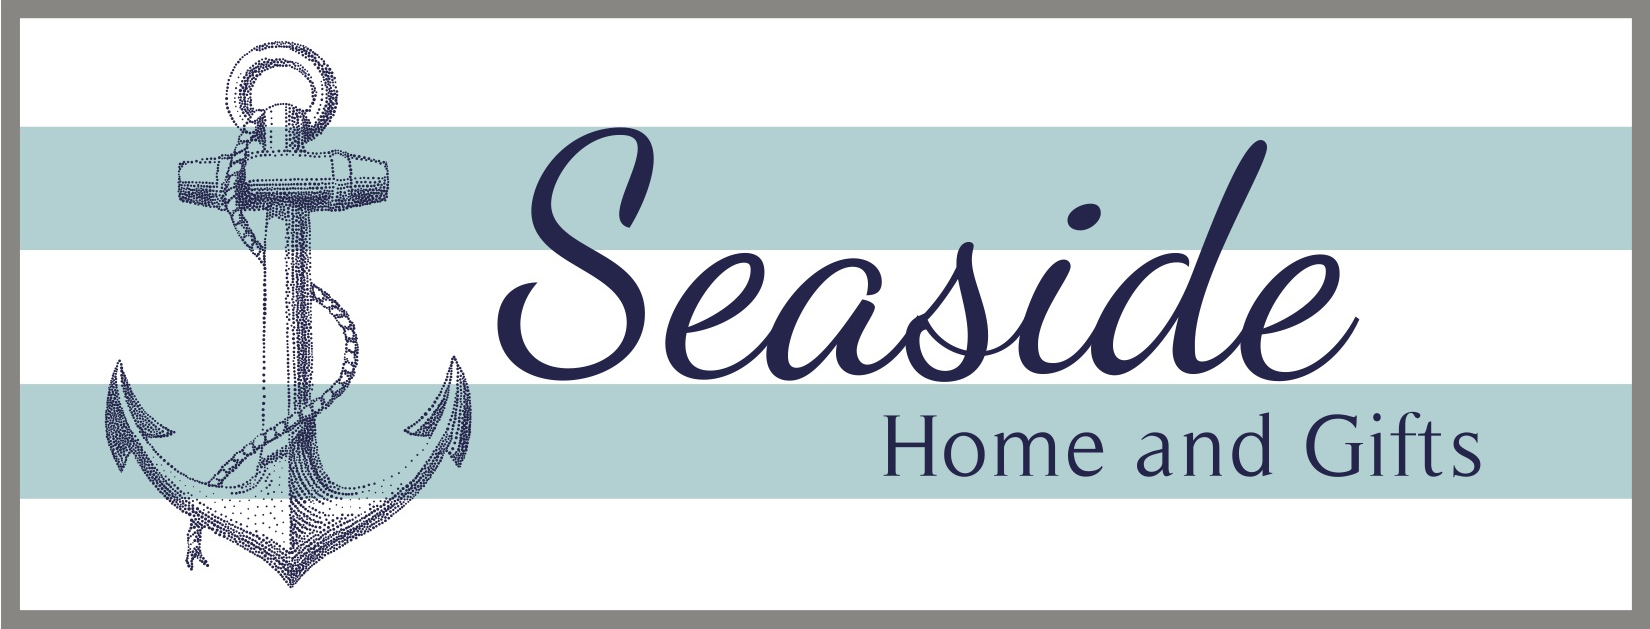 Seaside Home and Gifts